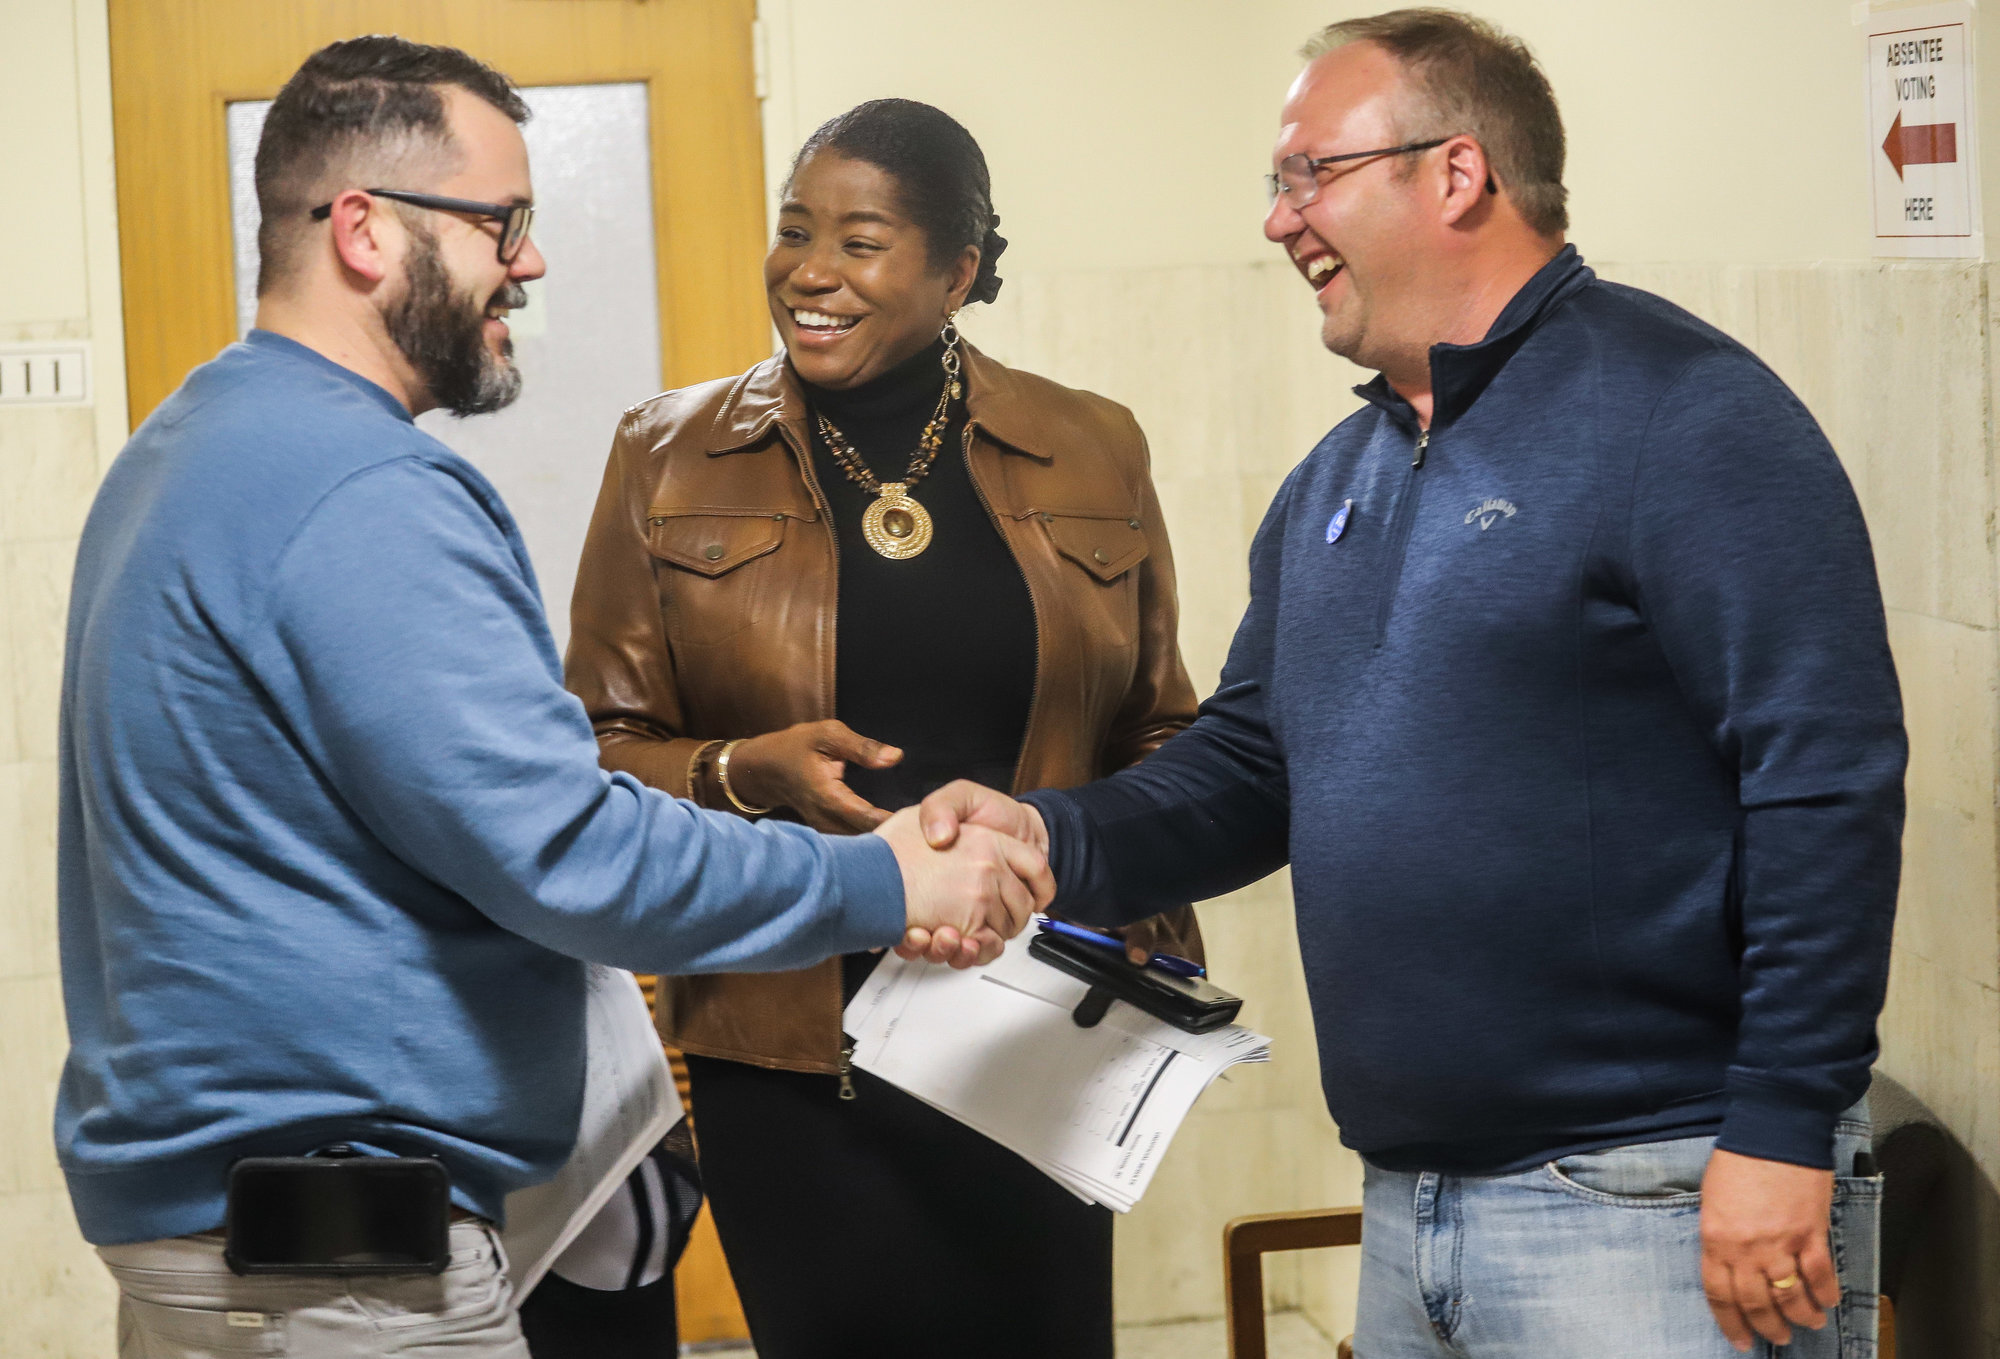 From left, Jeff Zell, District 8, Tarah Cousar Johnson, District 4, and Daniel Palumbo, District 1, congratulate each other on their election wins at the Sumter County Courthouse on Tuesday night.